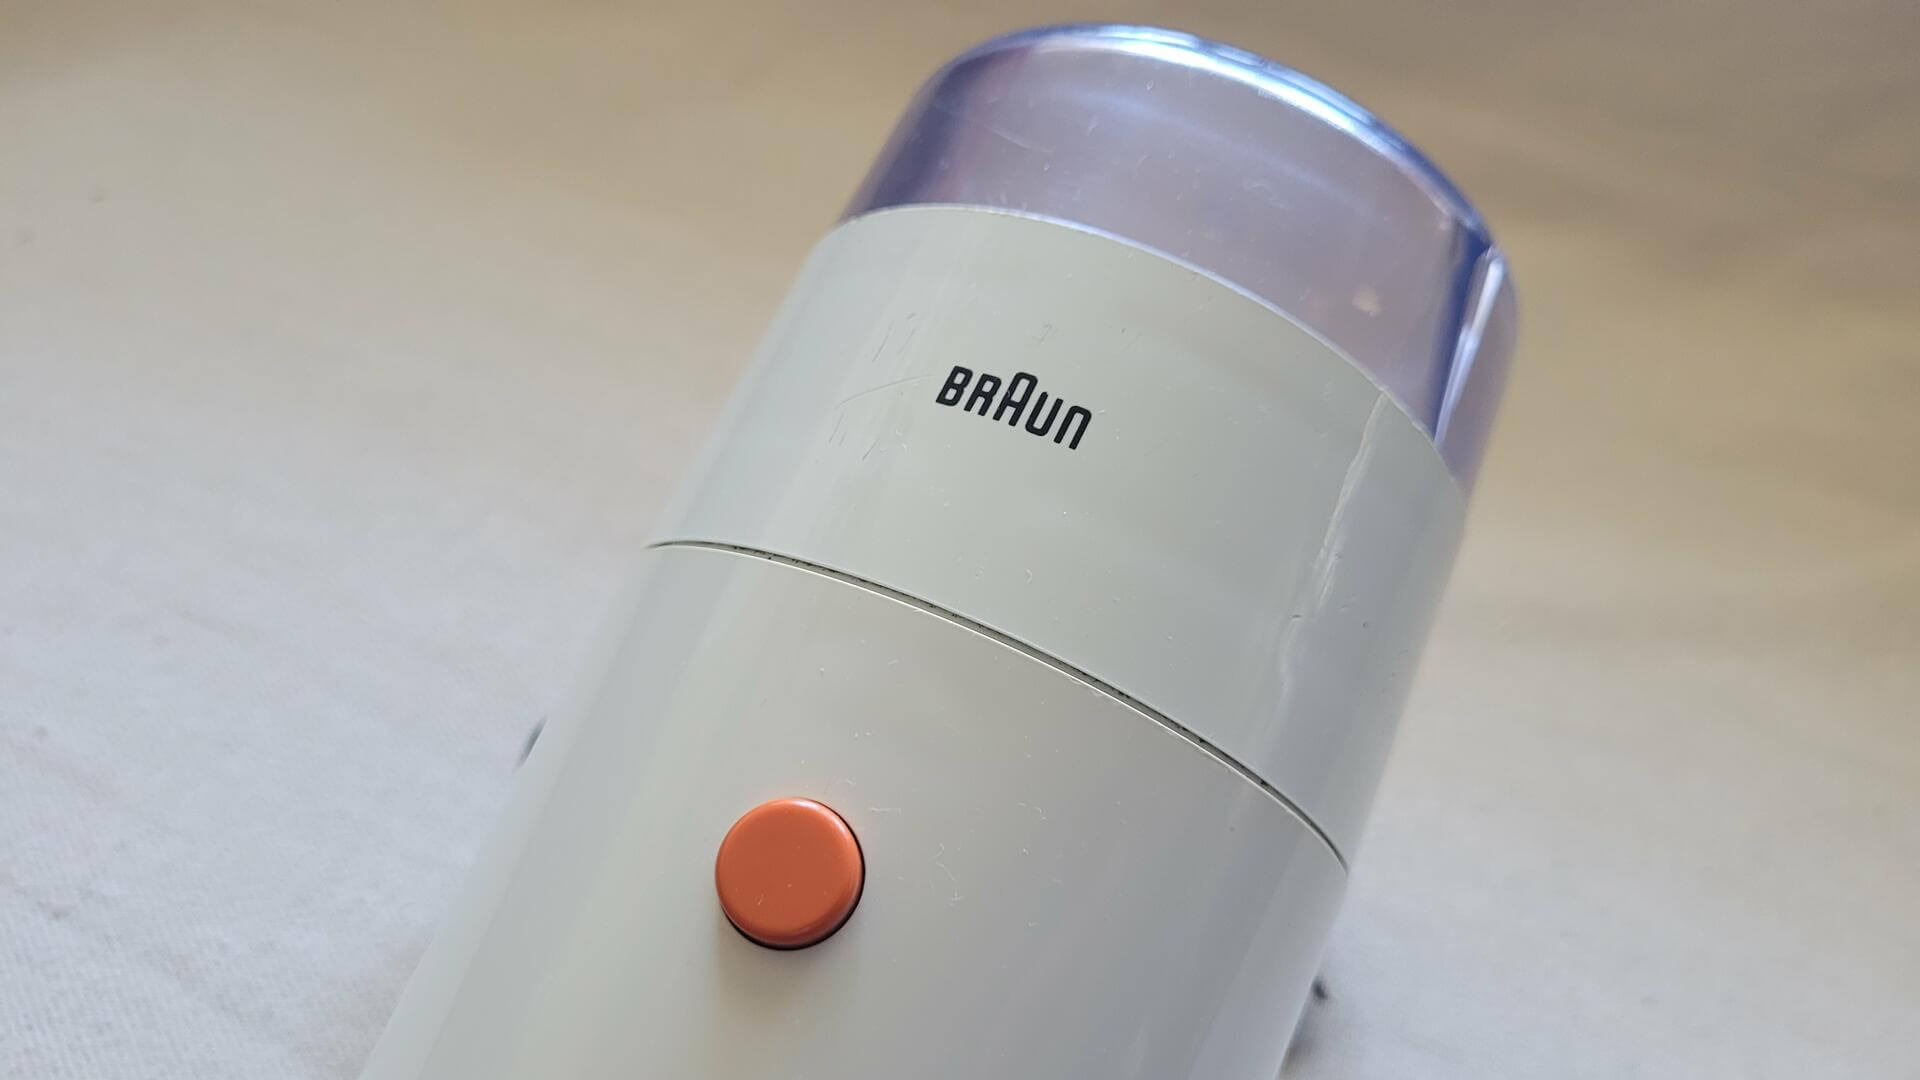 https://vinty.ca/wp-content/uploads/sites/11/2023/10/braun-ksm1-coffee-grinder-reinhold-weiss-design-rare-vintage-made-in-west-germany-1960s-collectible-household-appliances-and-electronics.jpg